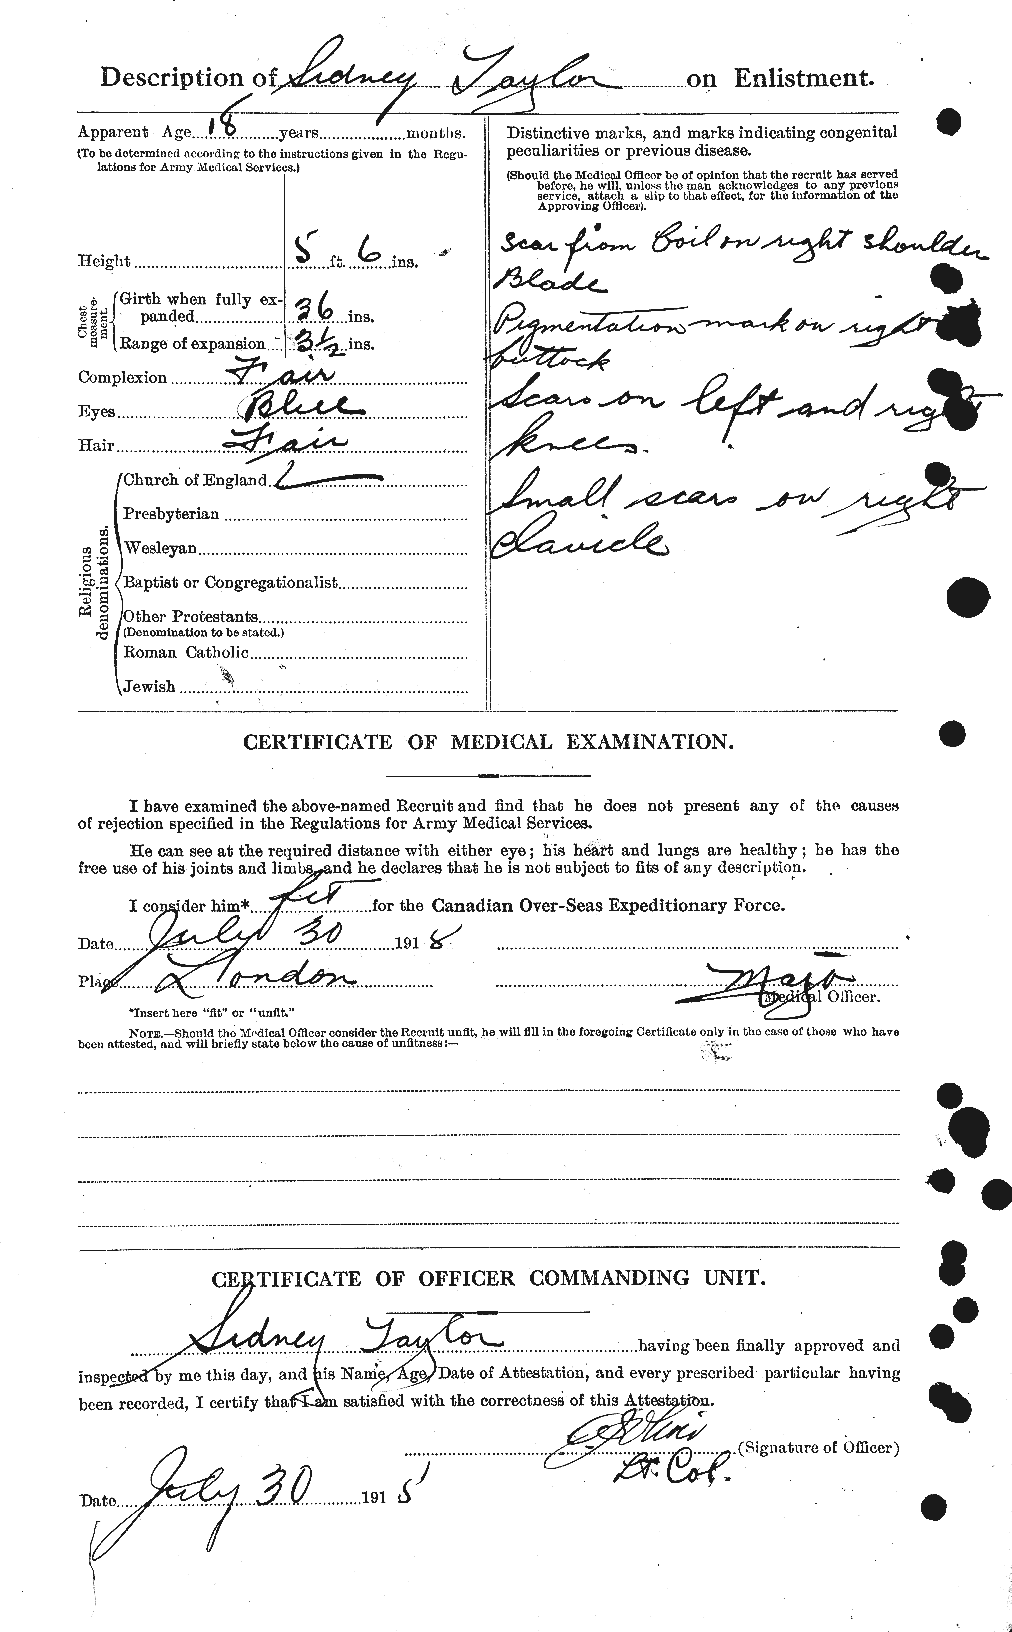 Personnel Records of the First World War - CEF 627898b